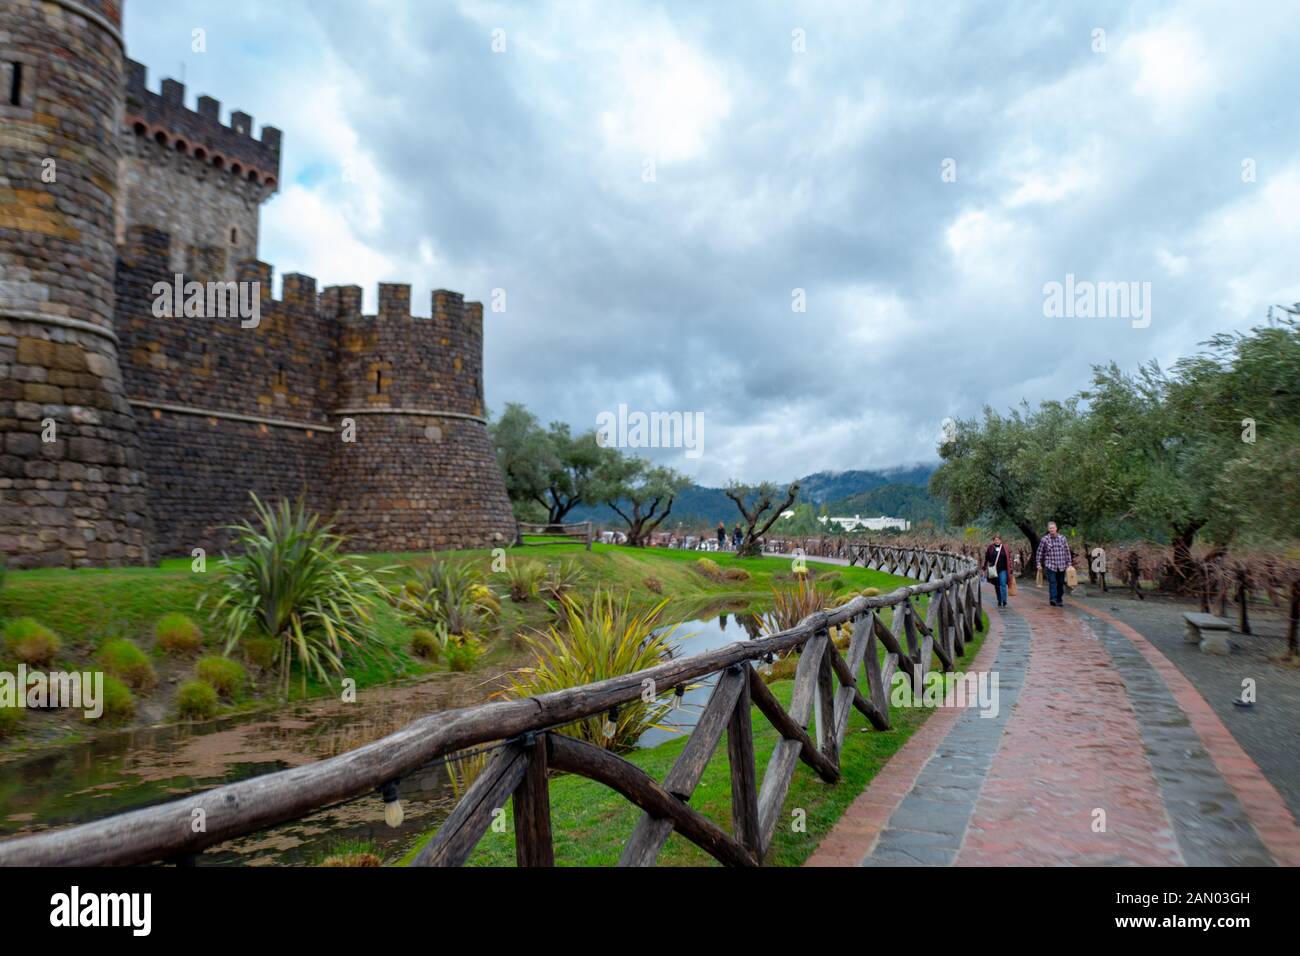 Grounds and ramparts at Castello di Amorosa, a vineyard in the Calistoga AVA of the Napa Valley in the California Wine Country, housed in a large reconstruction of a Tuscan castle, Calistoga, California, December 22, 2019. () Stock Photo